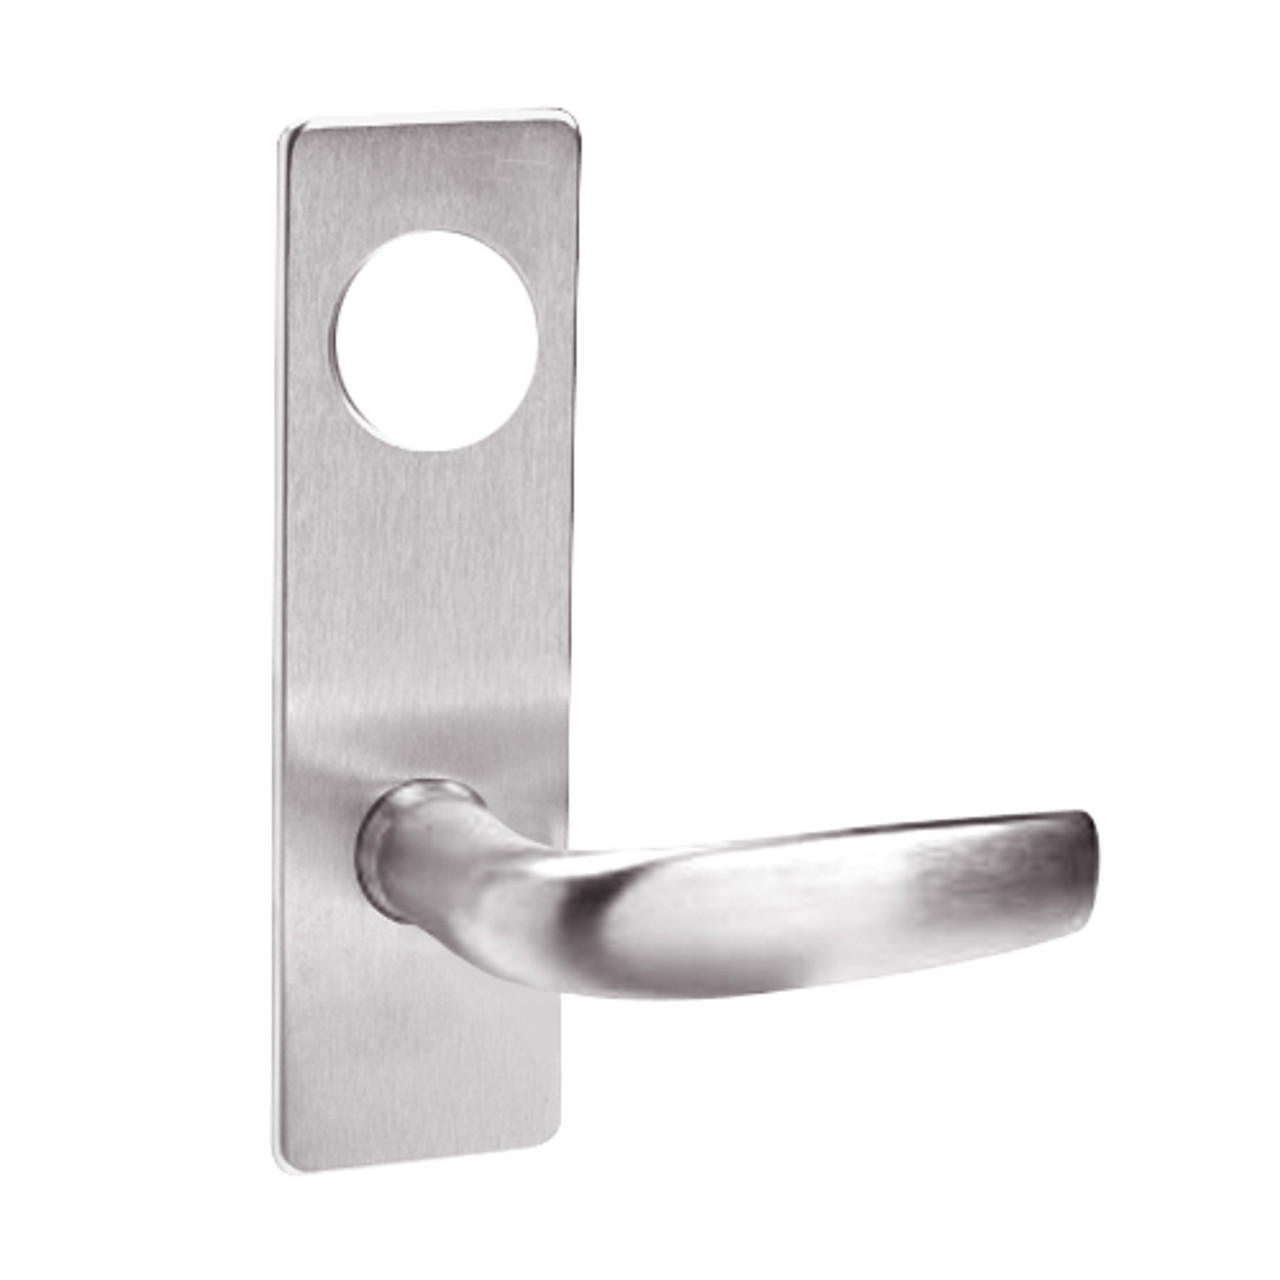 ML2068-CSN-629 Corbin Russwin ML2000 Series Mortise Privacy or Apartment Locksets with Citation Lever in Bright Stainless Steel